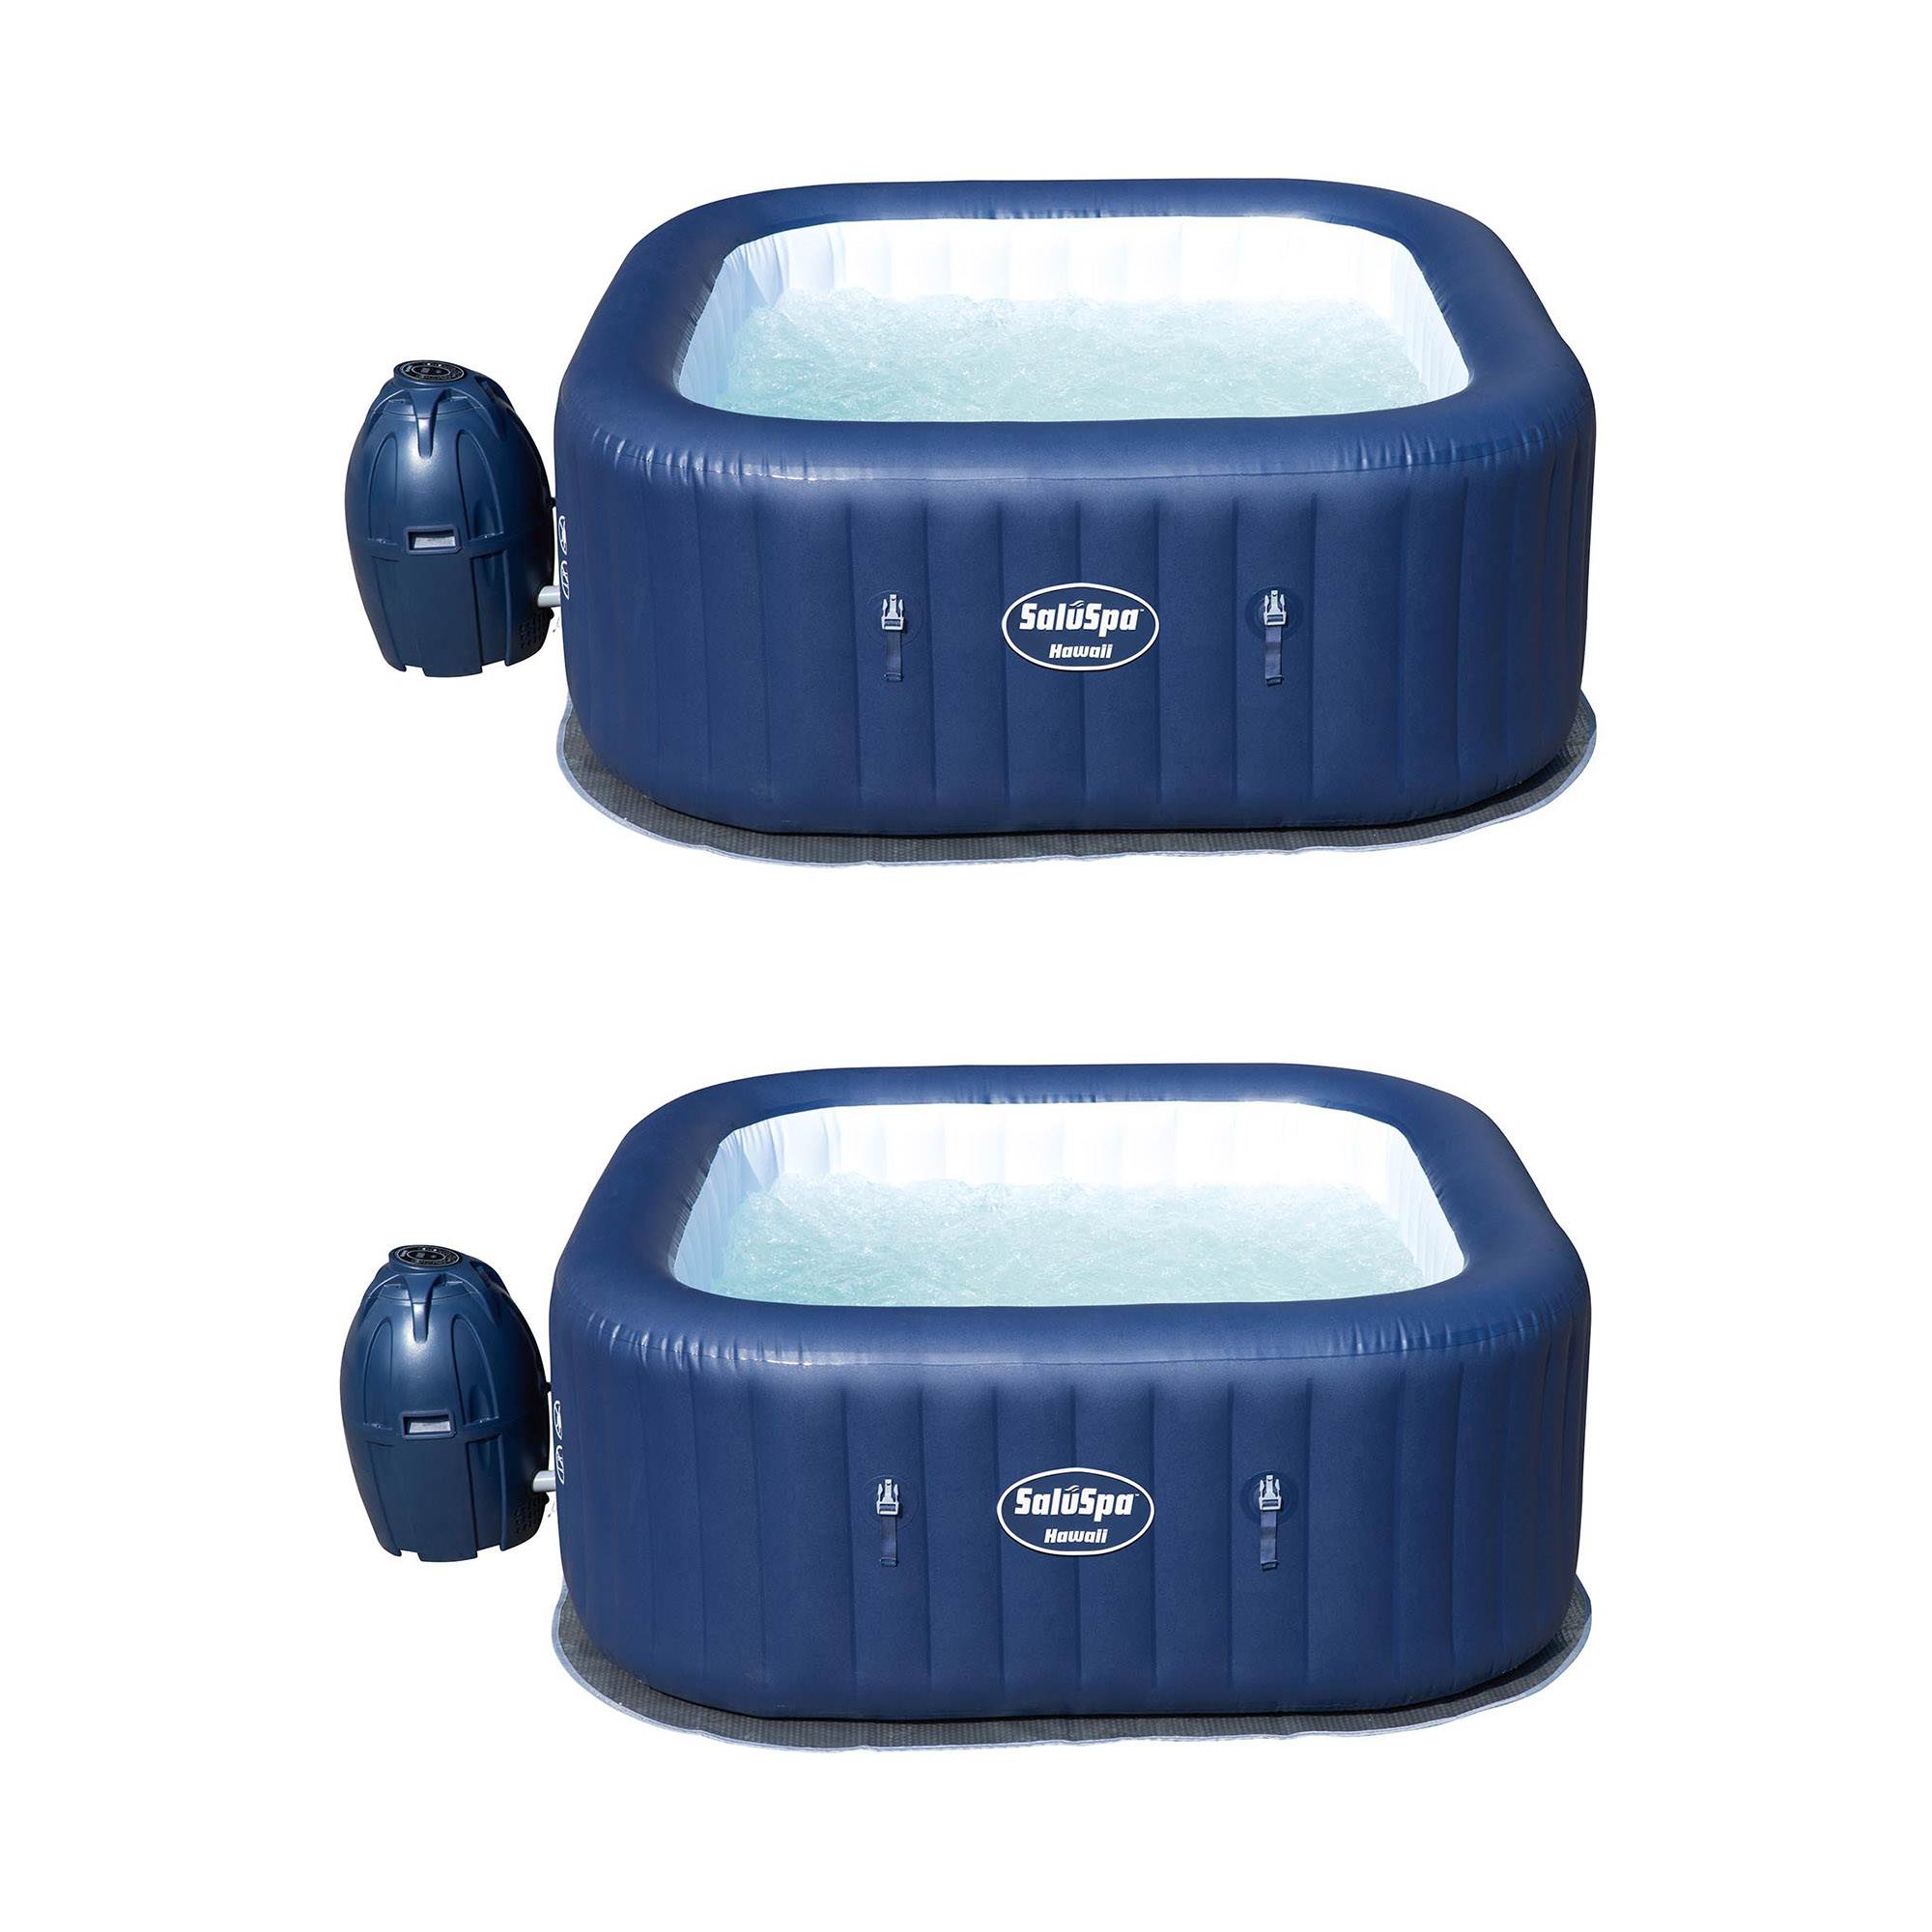 Bestway 4-Person Inflatable Square Hot Tub at